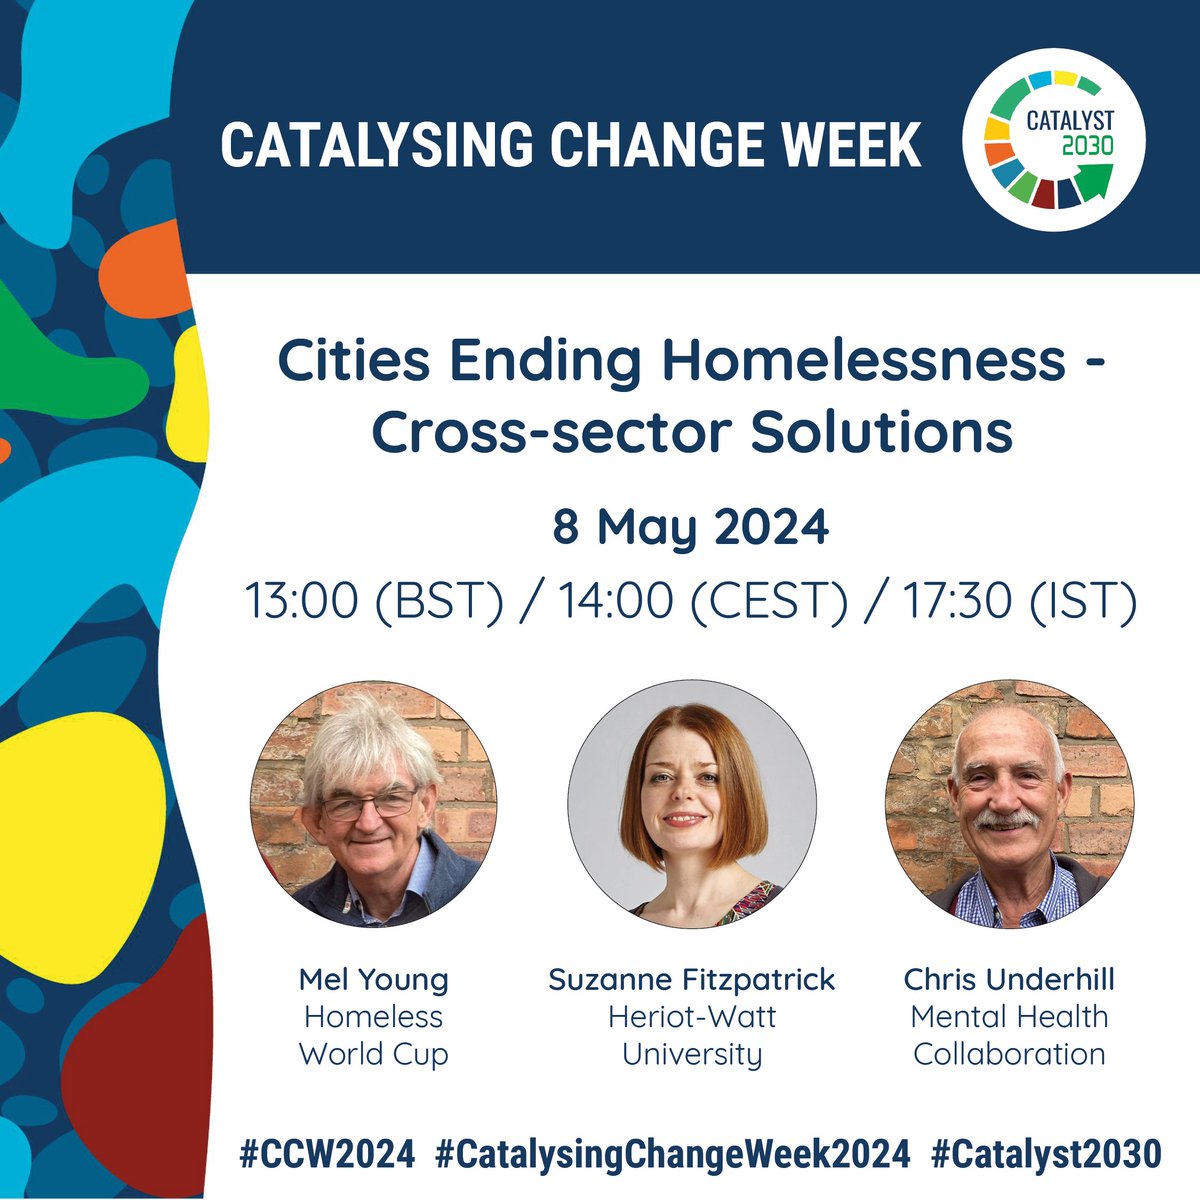 Do you want to talk about solutions to #homelessness? So do we! Join our co-founder Mel Young, Suzanne Fitzpatrick & Chris Underhill in our Cities Ending Homelessness webinar on Wed (8 May)! Register free: catalyst2030.net/events/cities-… @ISPHERE_HWU @Catalyst_2030 #Homeless #CCW2024